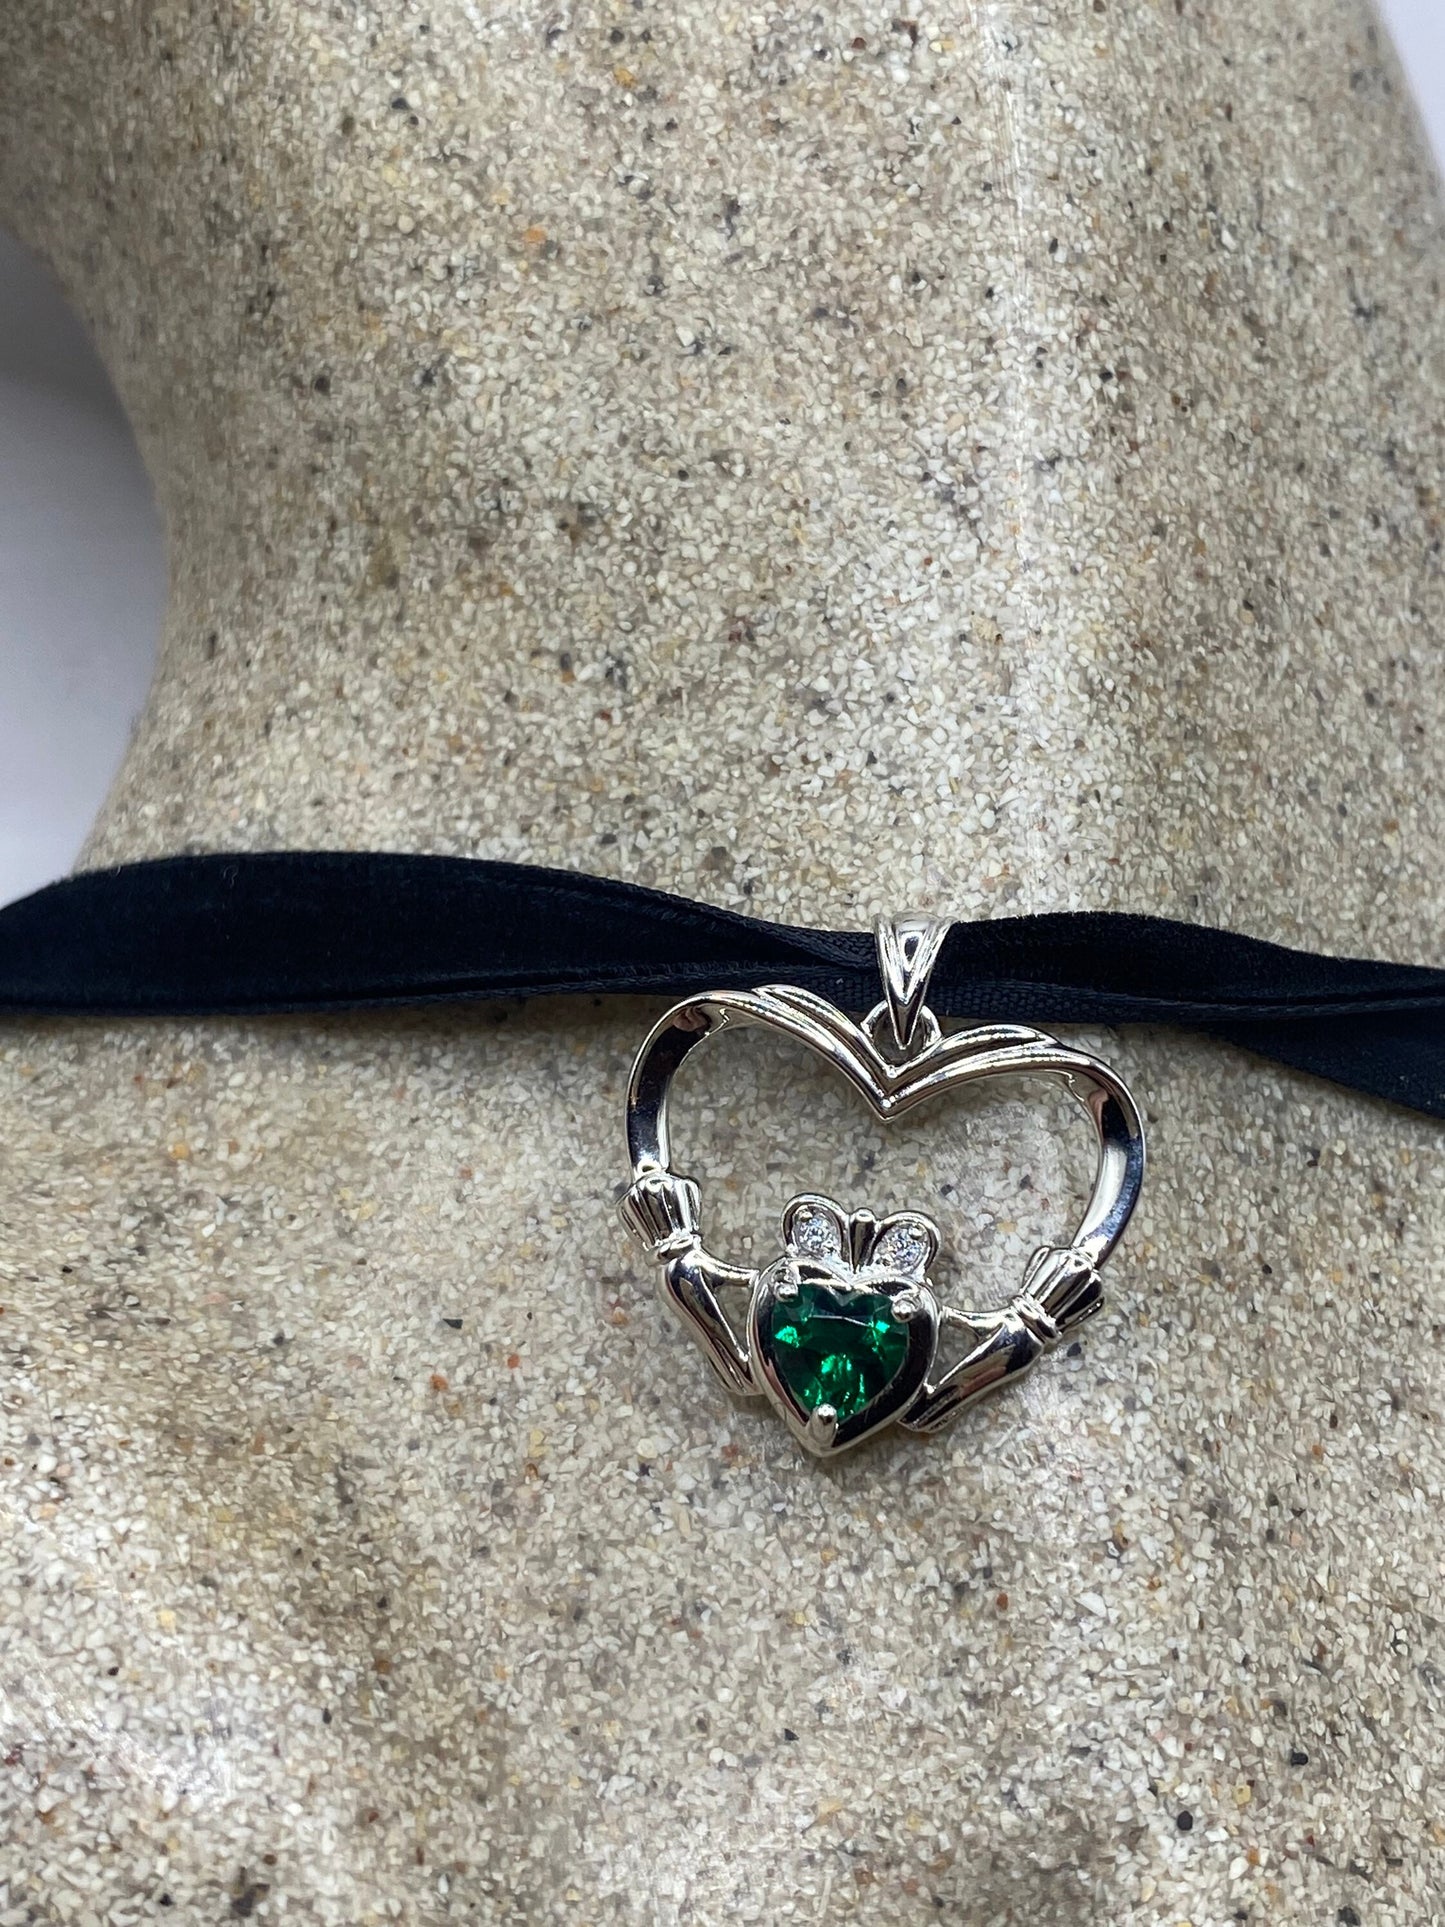 Vintage Green Chrome Diopside Choker 925 Sterling Silver Heart Pendant Necklace